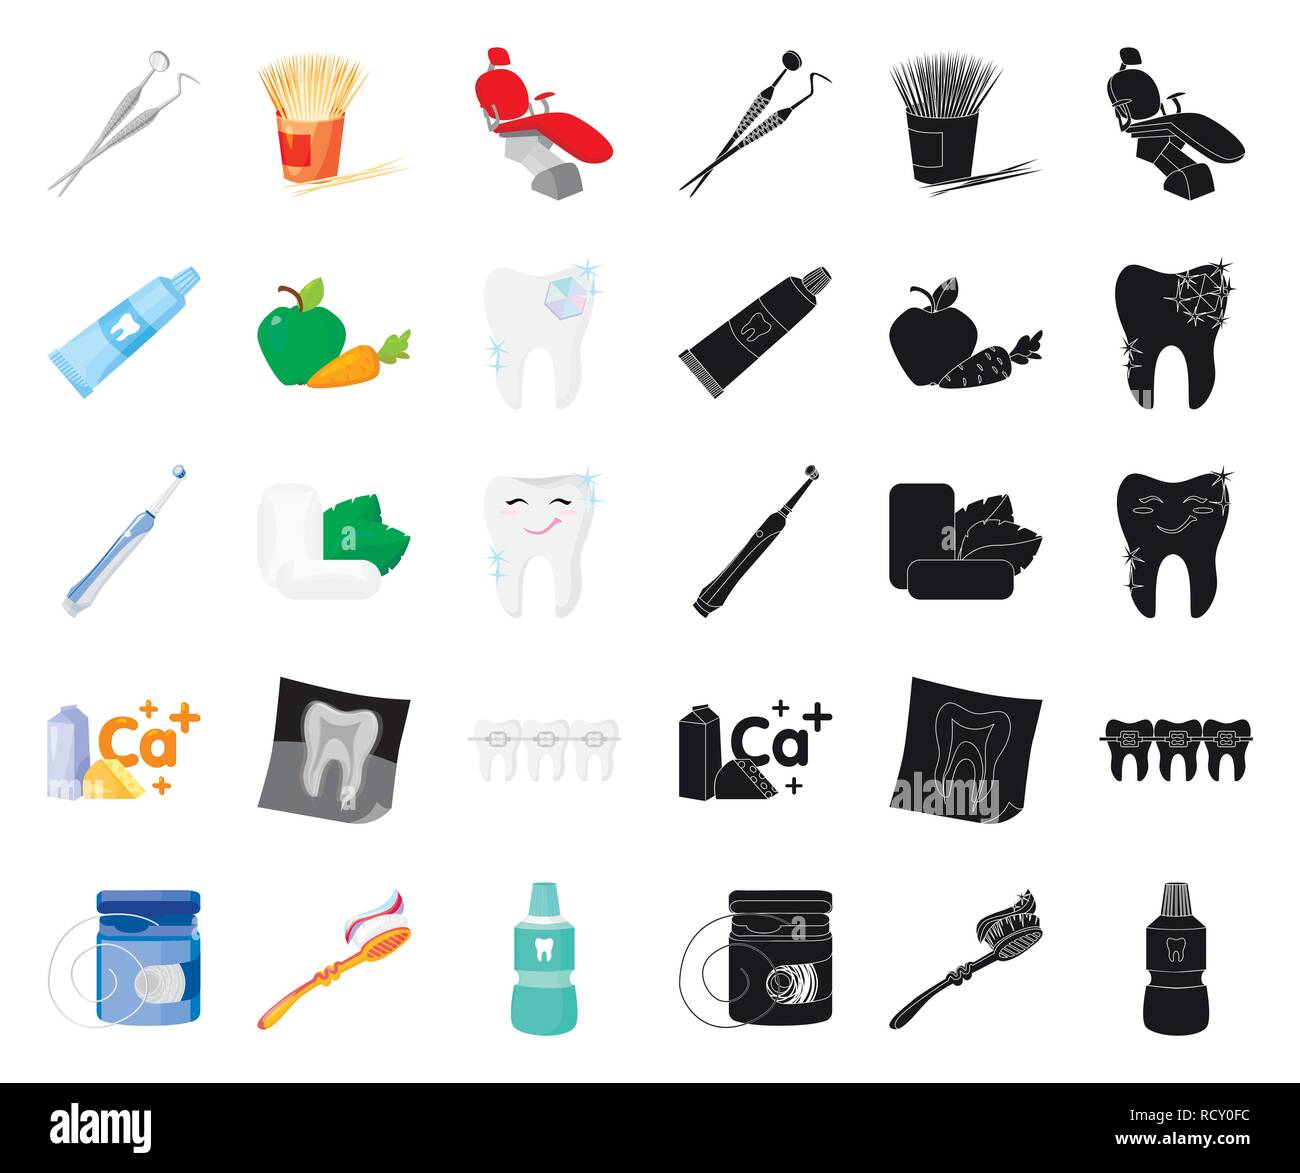 adaptation,apple,art,bottle,braces,calcium,care,carrot,cartoon,black,chair,chewing,clinic,collection,dental,dentist,dentistry,design,diamond,doctor,electric,equipment,floss,gum,hygiene,icon,illustration,instrument,isolated,logo,medicine,mouthwash,ray,set,sign,smile,smiling,sources,symbol,teeth,tooth,toothbrush,toothpaste,toothpick,treatment,vector,web,white,x Vector Vectors , Stock Vector